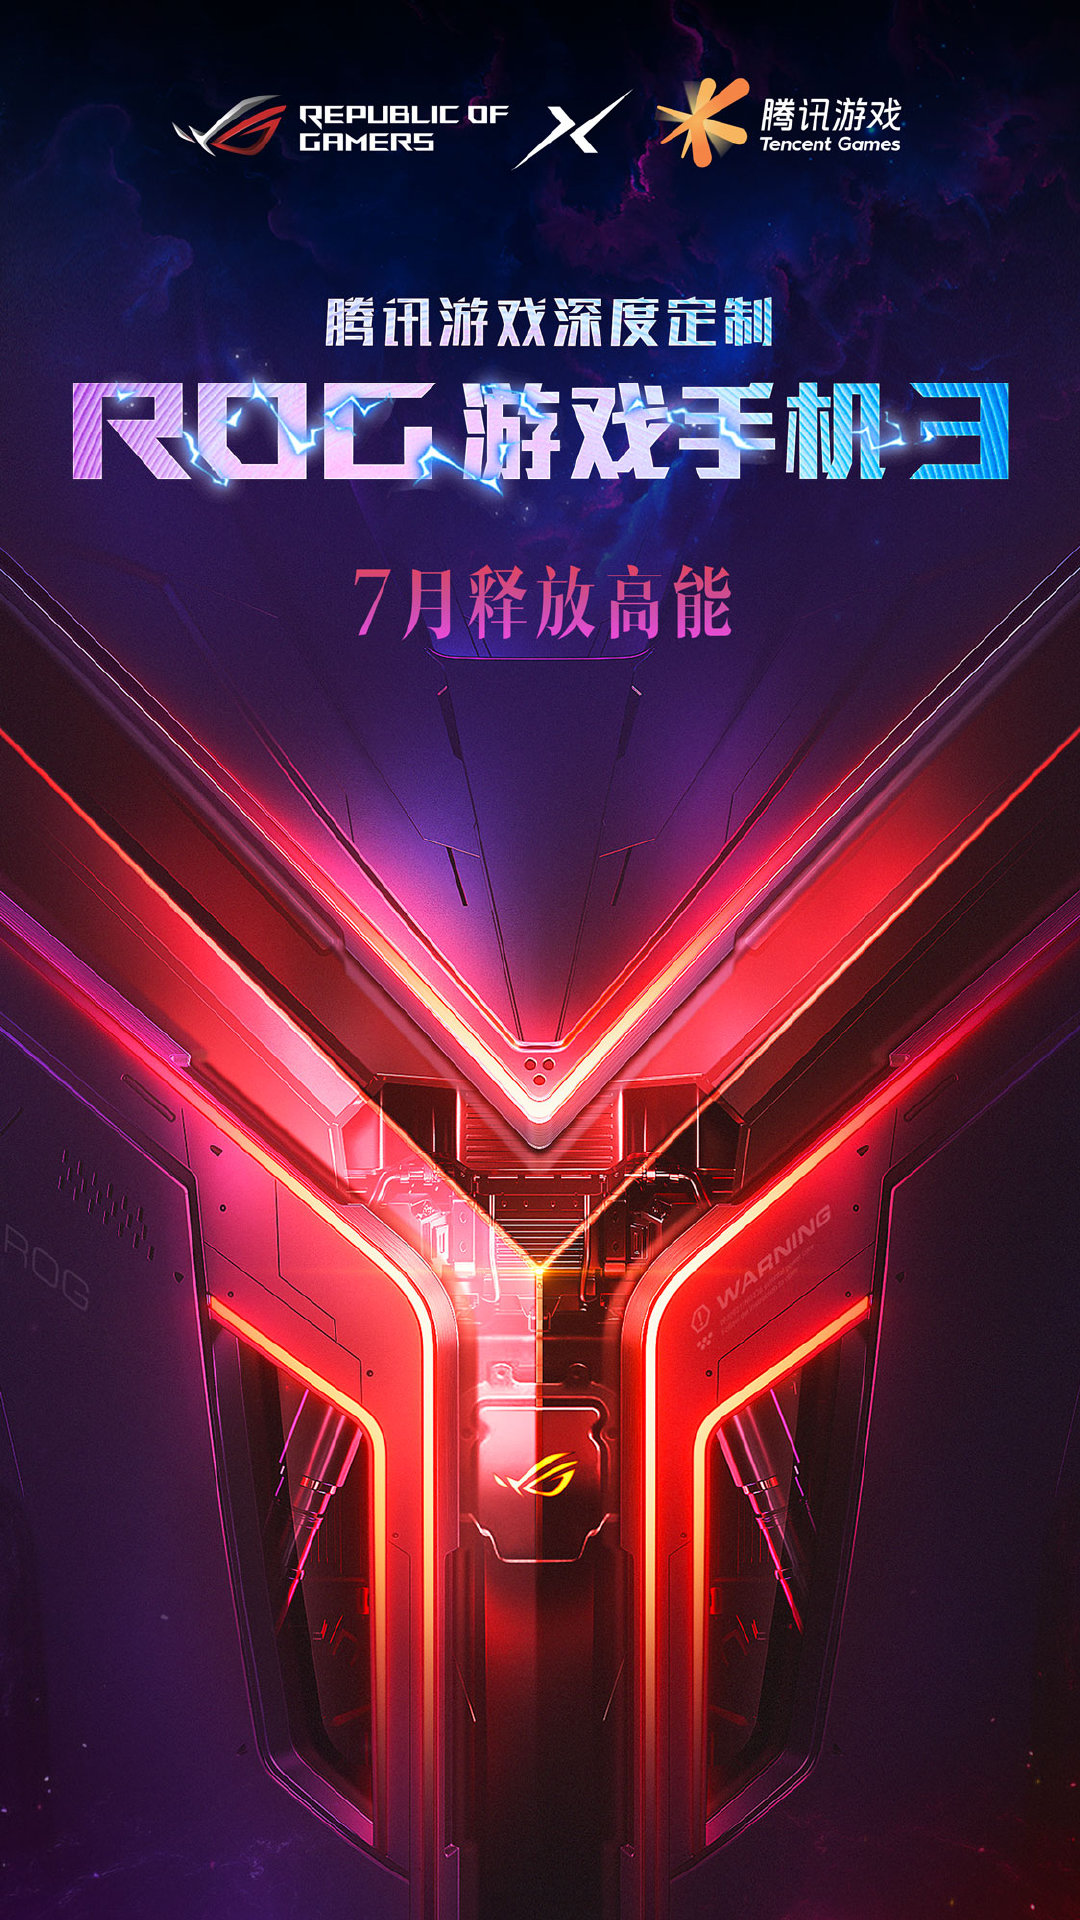 ASUS ROG Phone 3 July launch in China